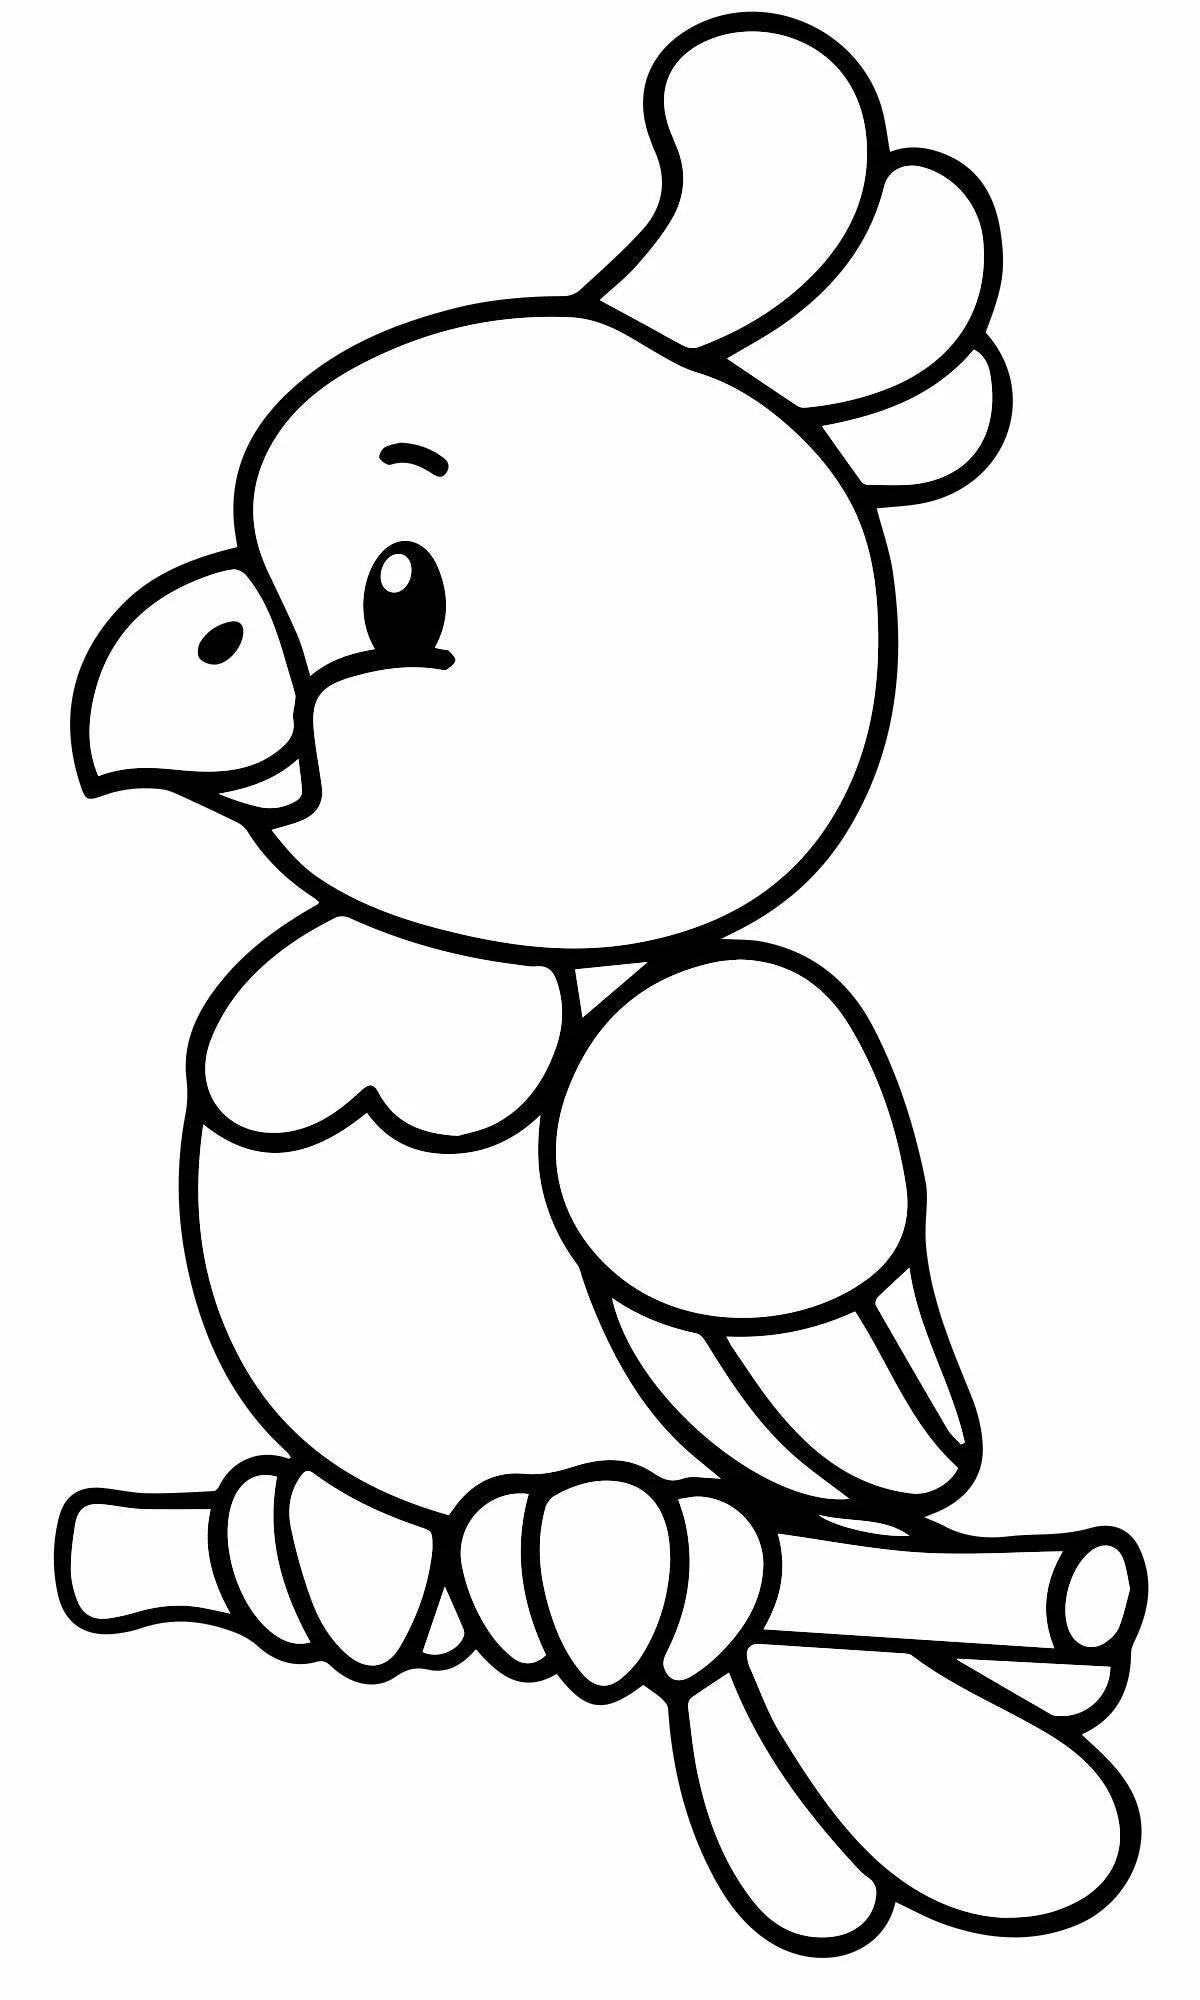 Outstanding bird coloring page for 2-3 year olds